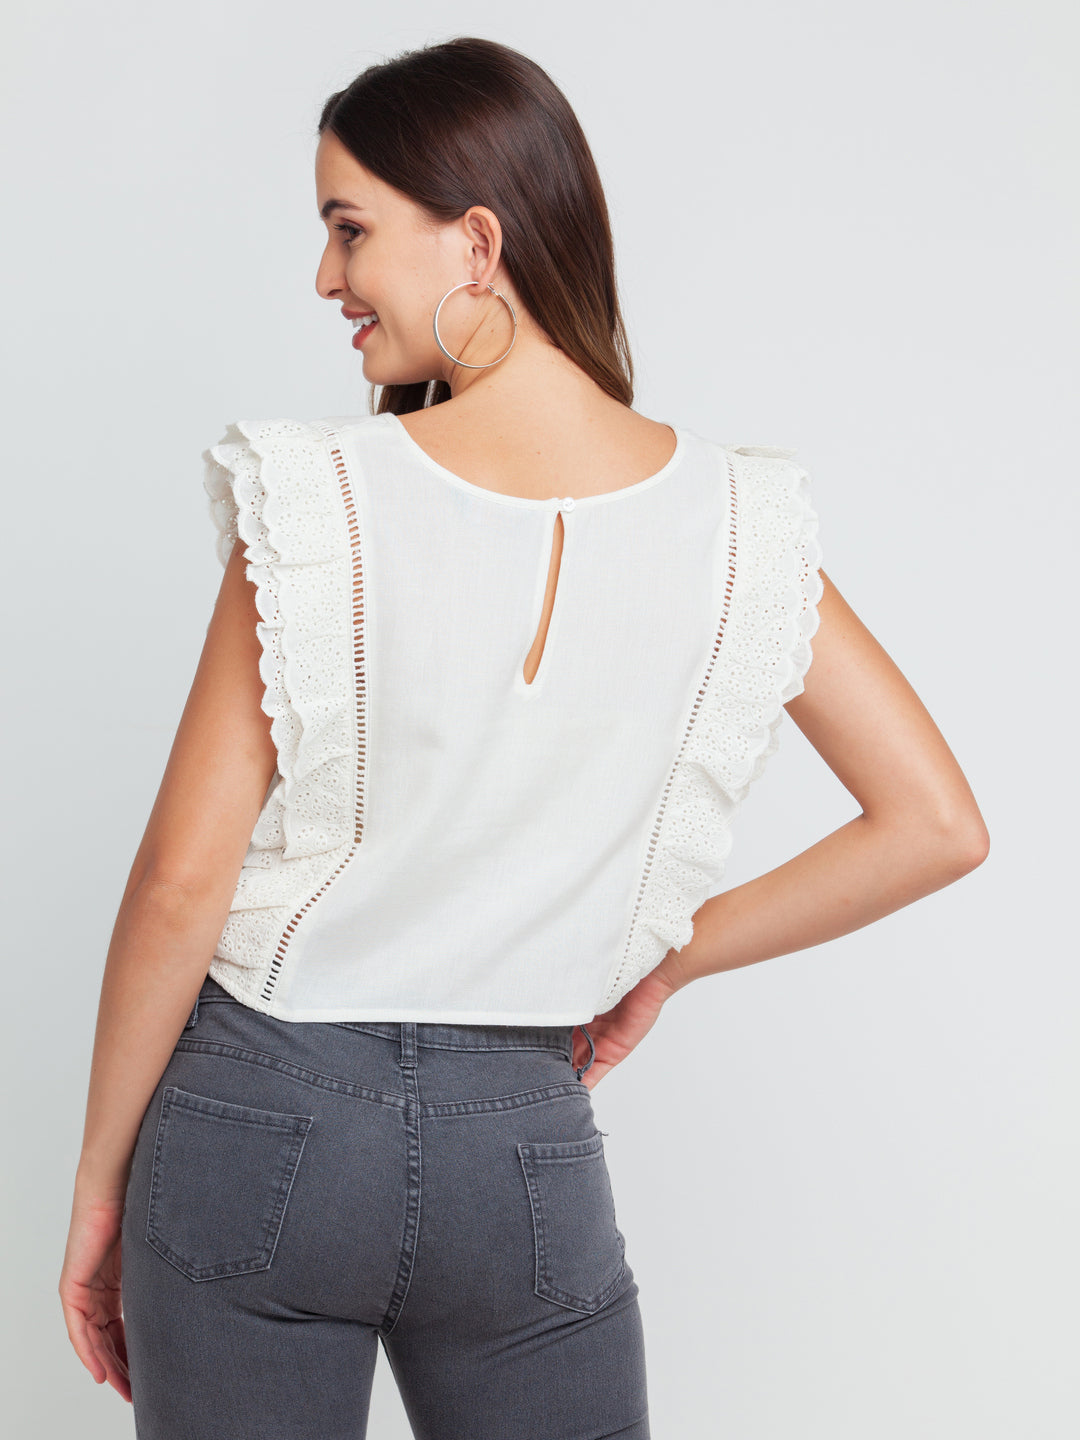 White Lace Lace Insert Top For Women